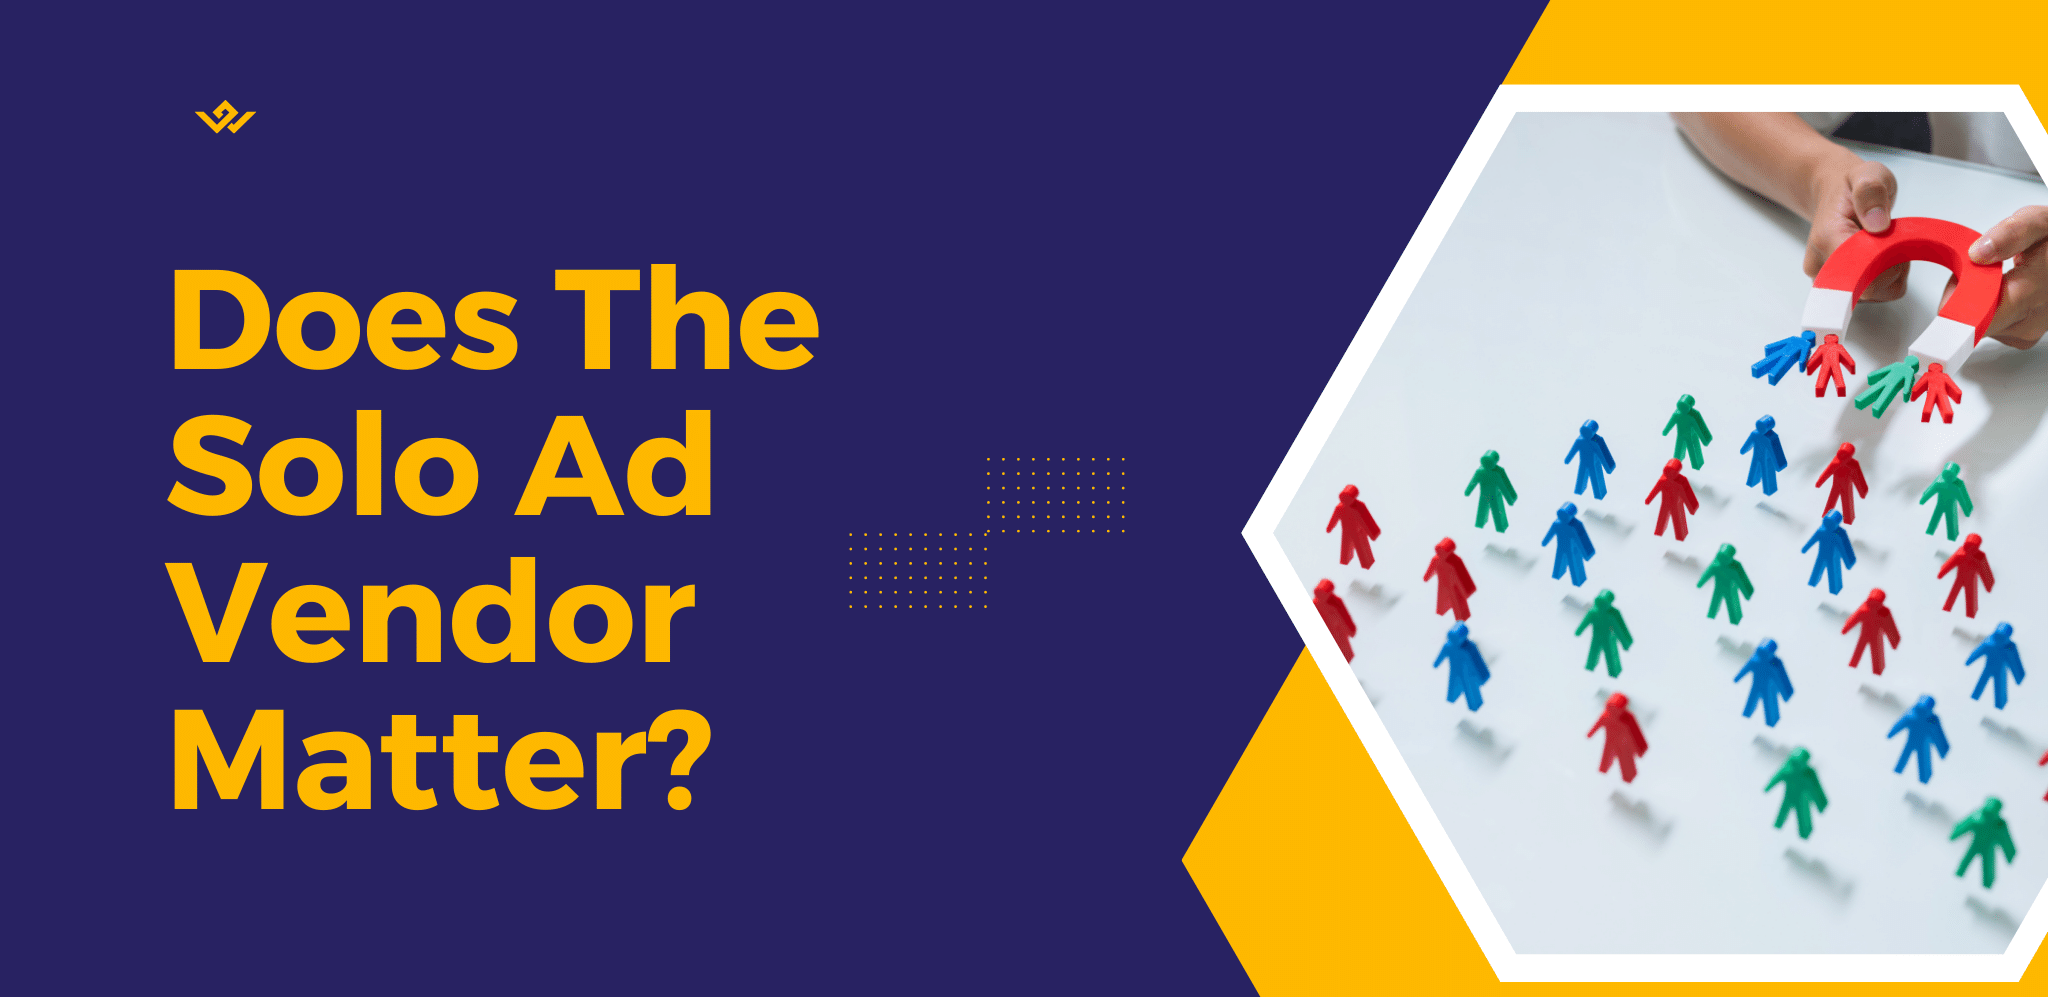 Does It Matter Which Solo Ads Vendor You Buy From